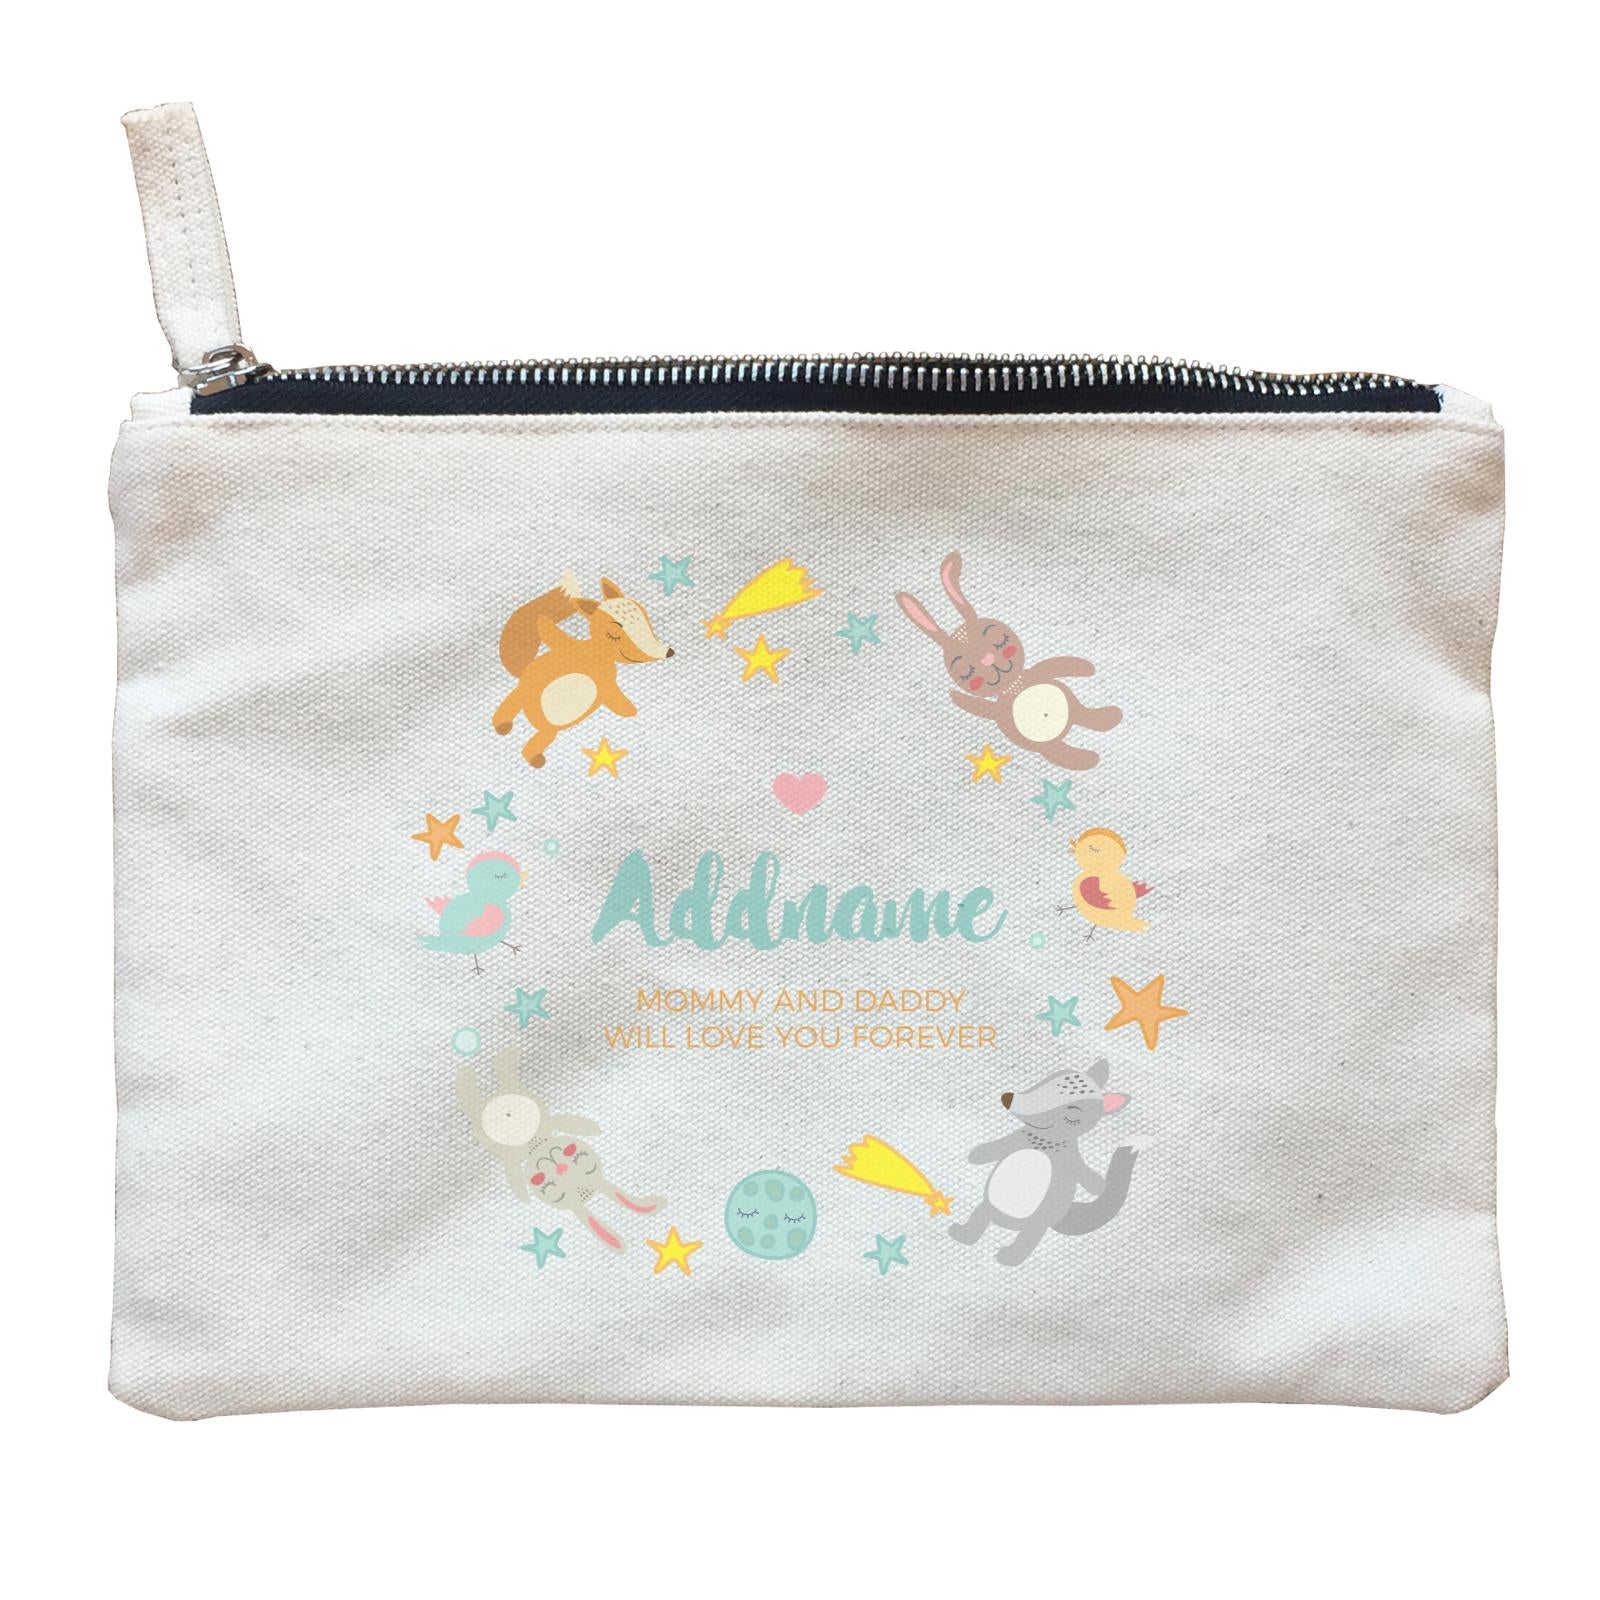 Cute Woodland Animals with Star Elements Personalizable with Name and Text Zipper Pouch